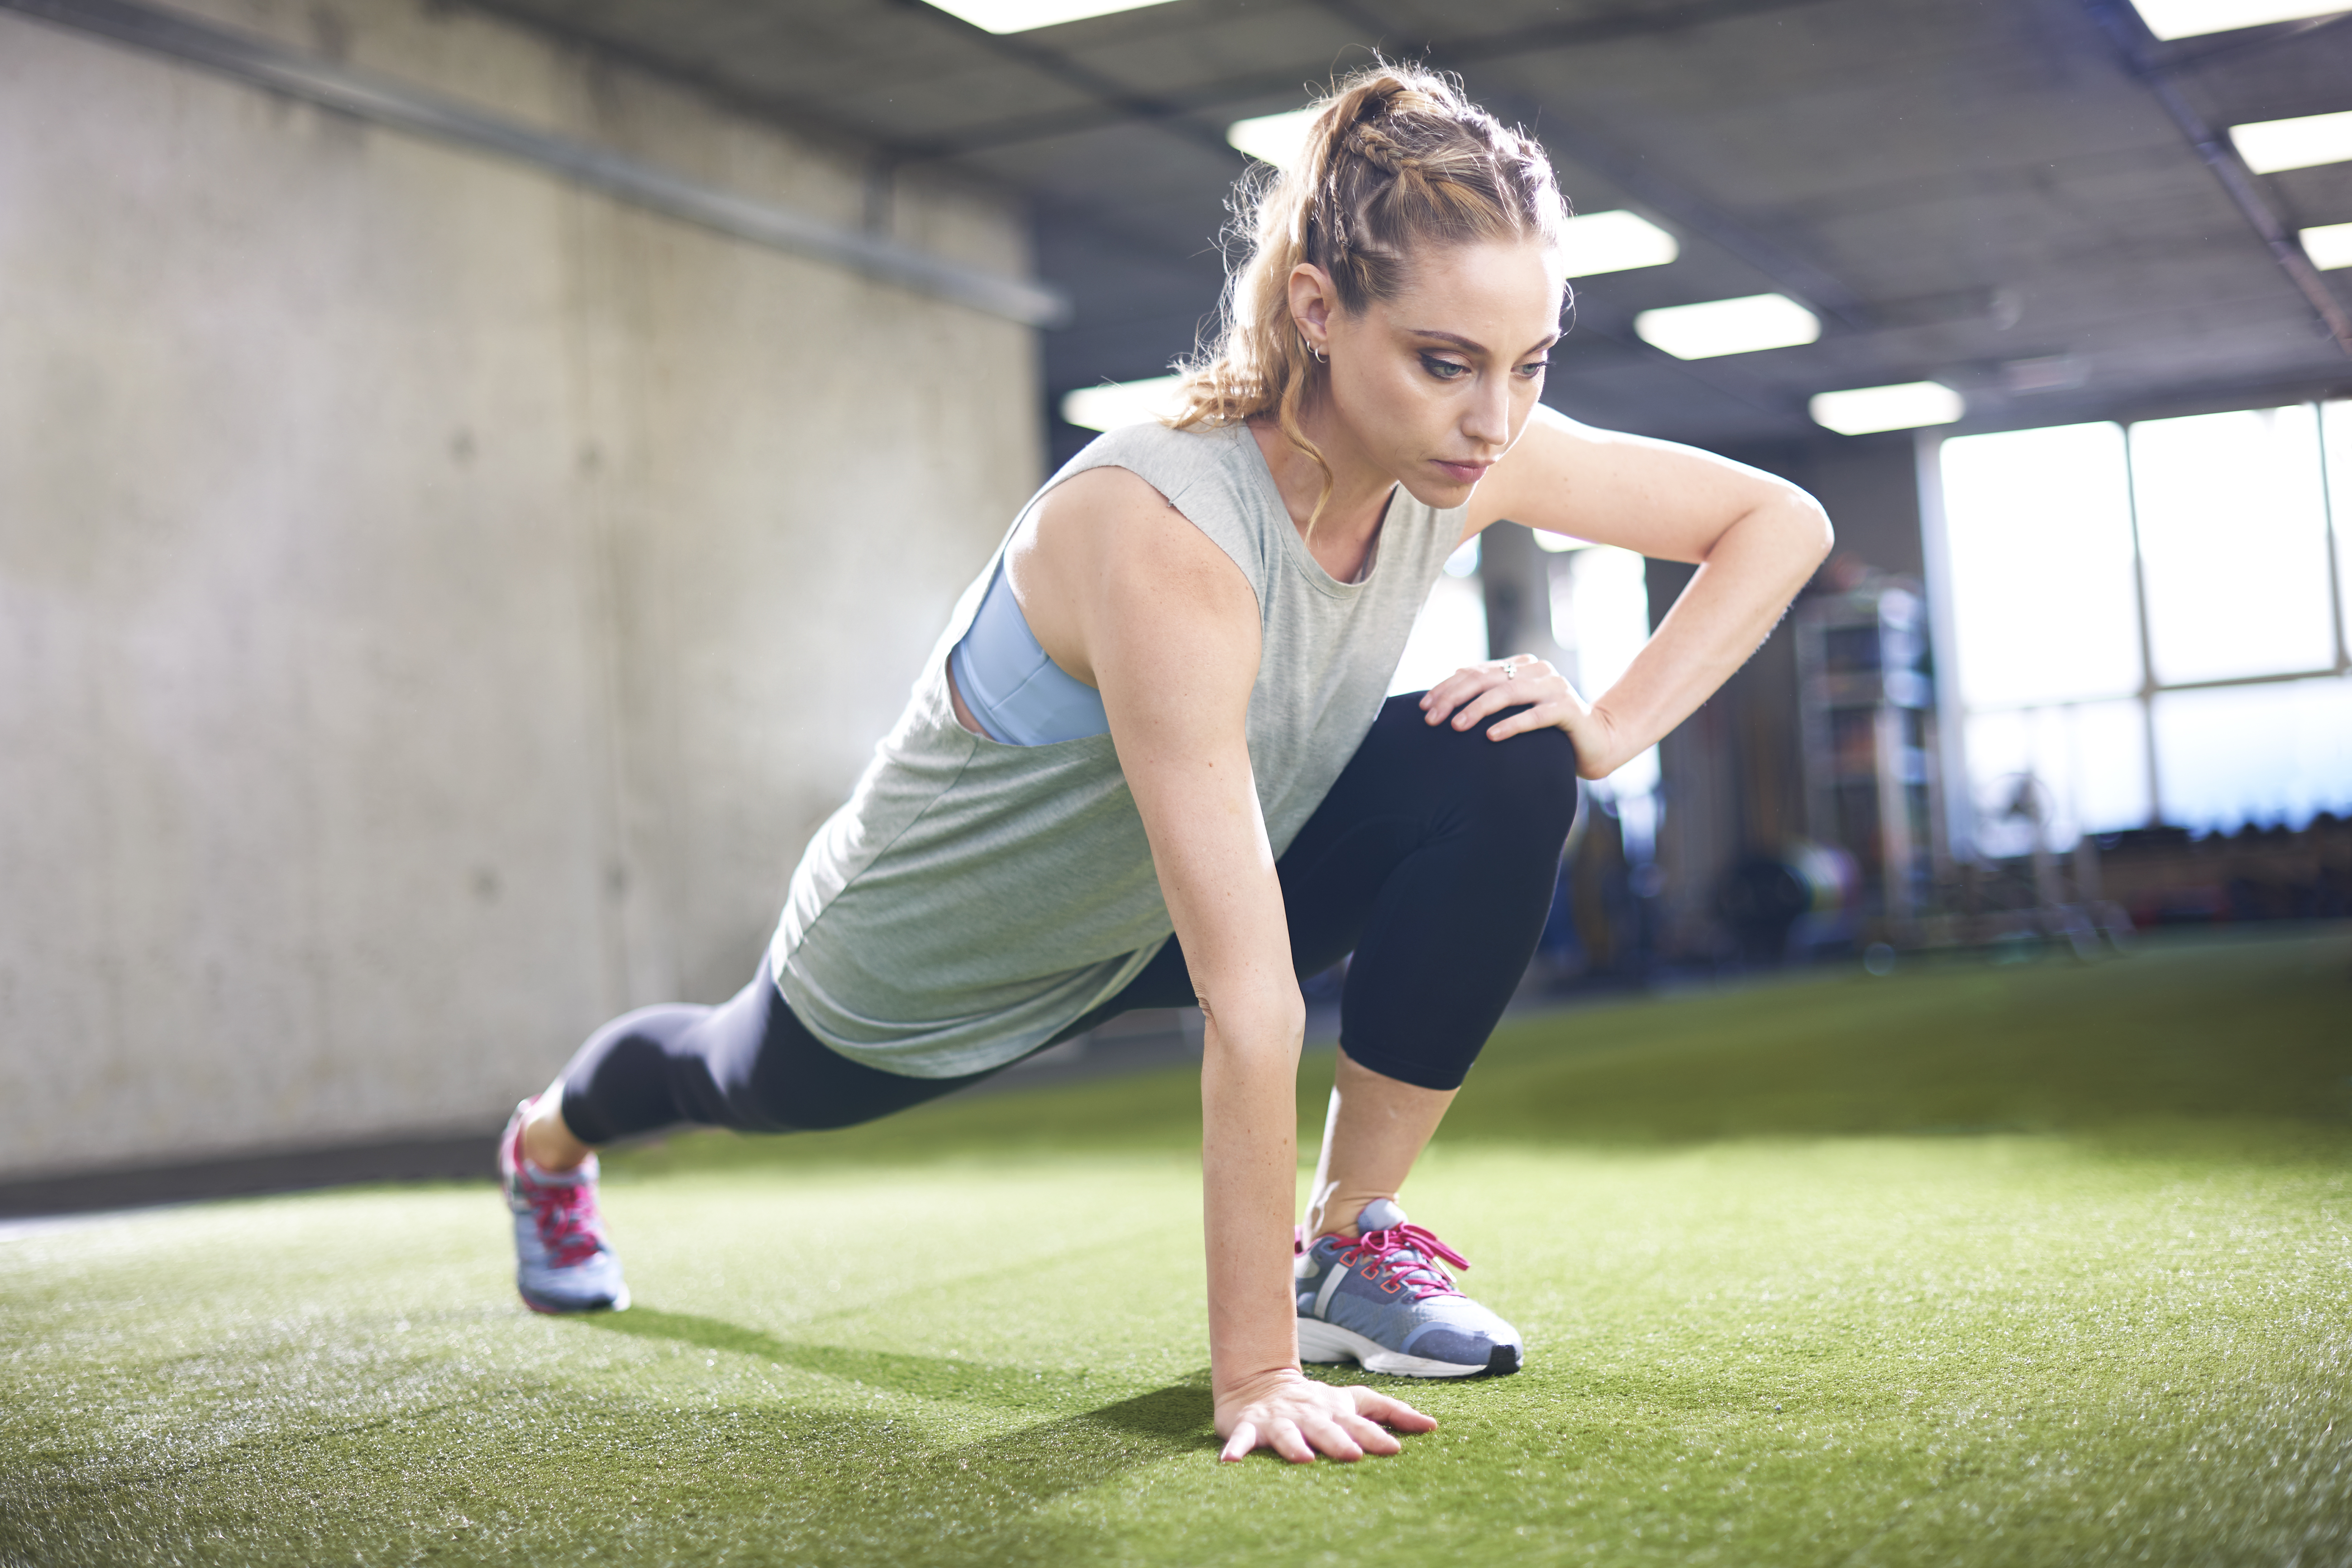 Injury Prevention Exercises to Do When Working Out